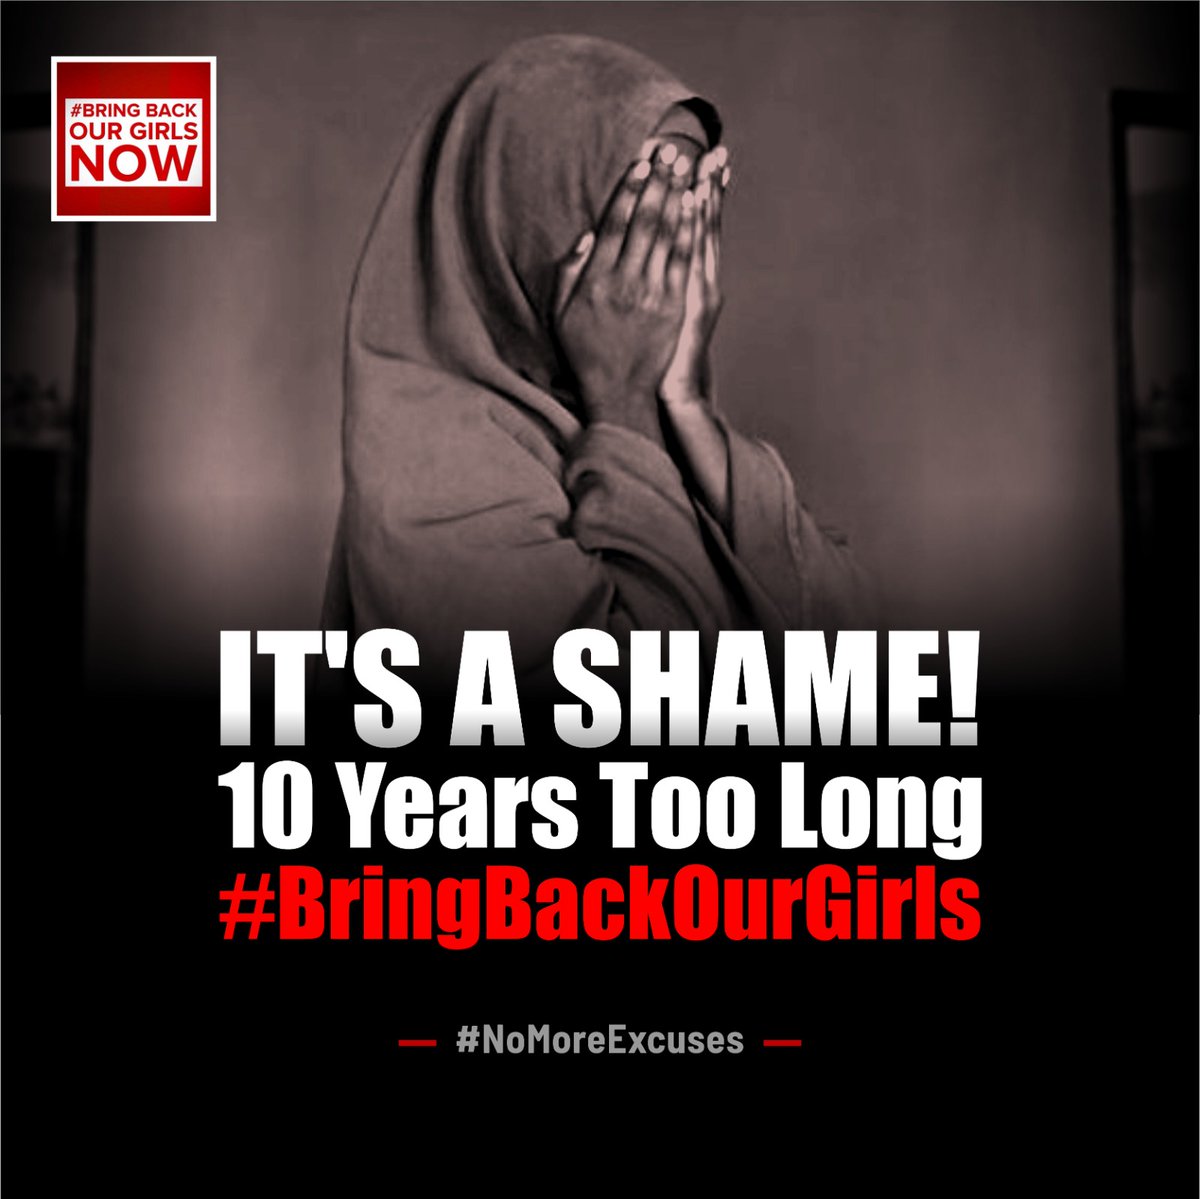 Just think about this for a moment - 10 YEARS as captives, torn from their families, their childhoods erased, their futures hanging by a thread. As you read this, 91 daughters, sisters, and friends from Chibok are still being denied their basic humanity. 💔
#BringBackOurGirls